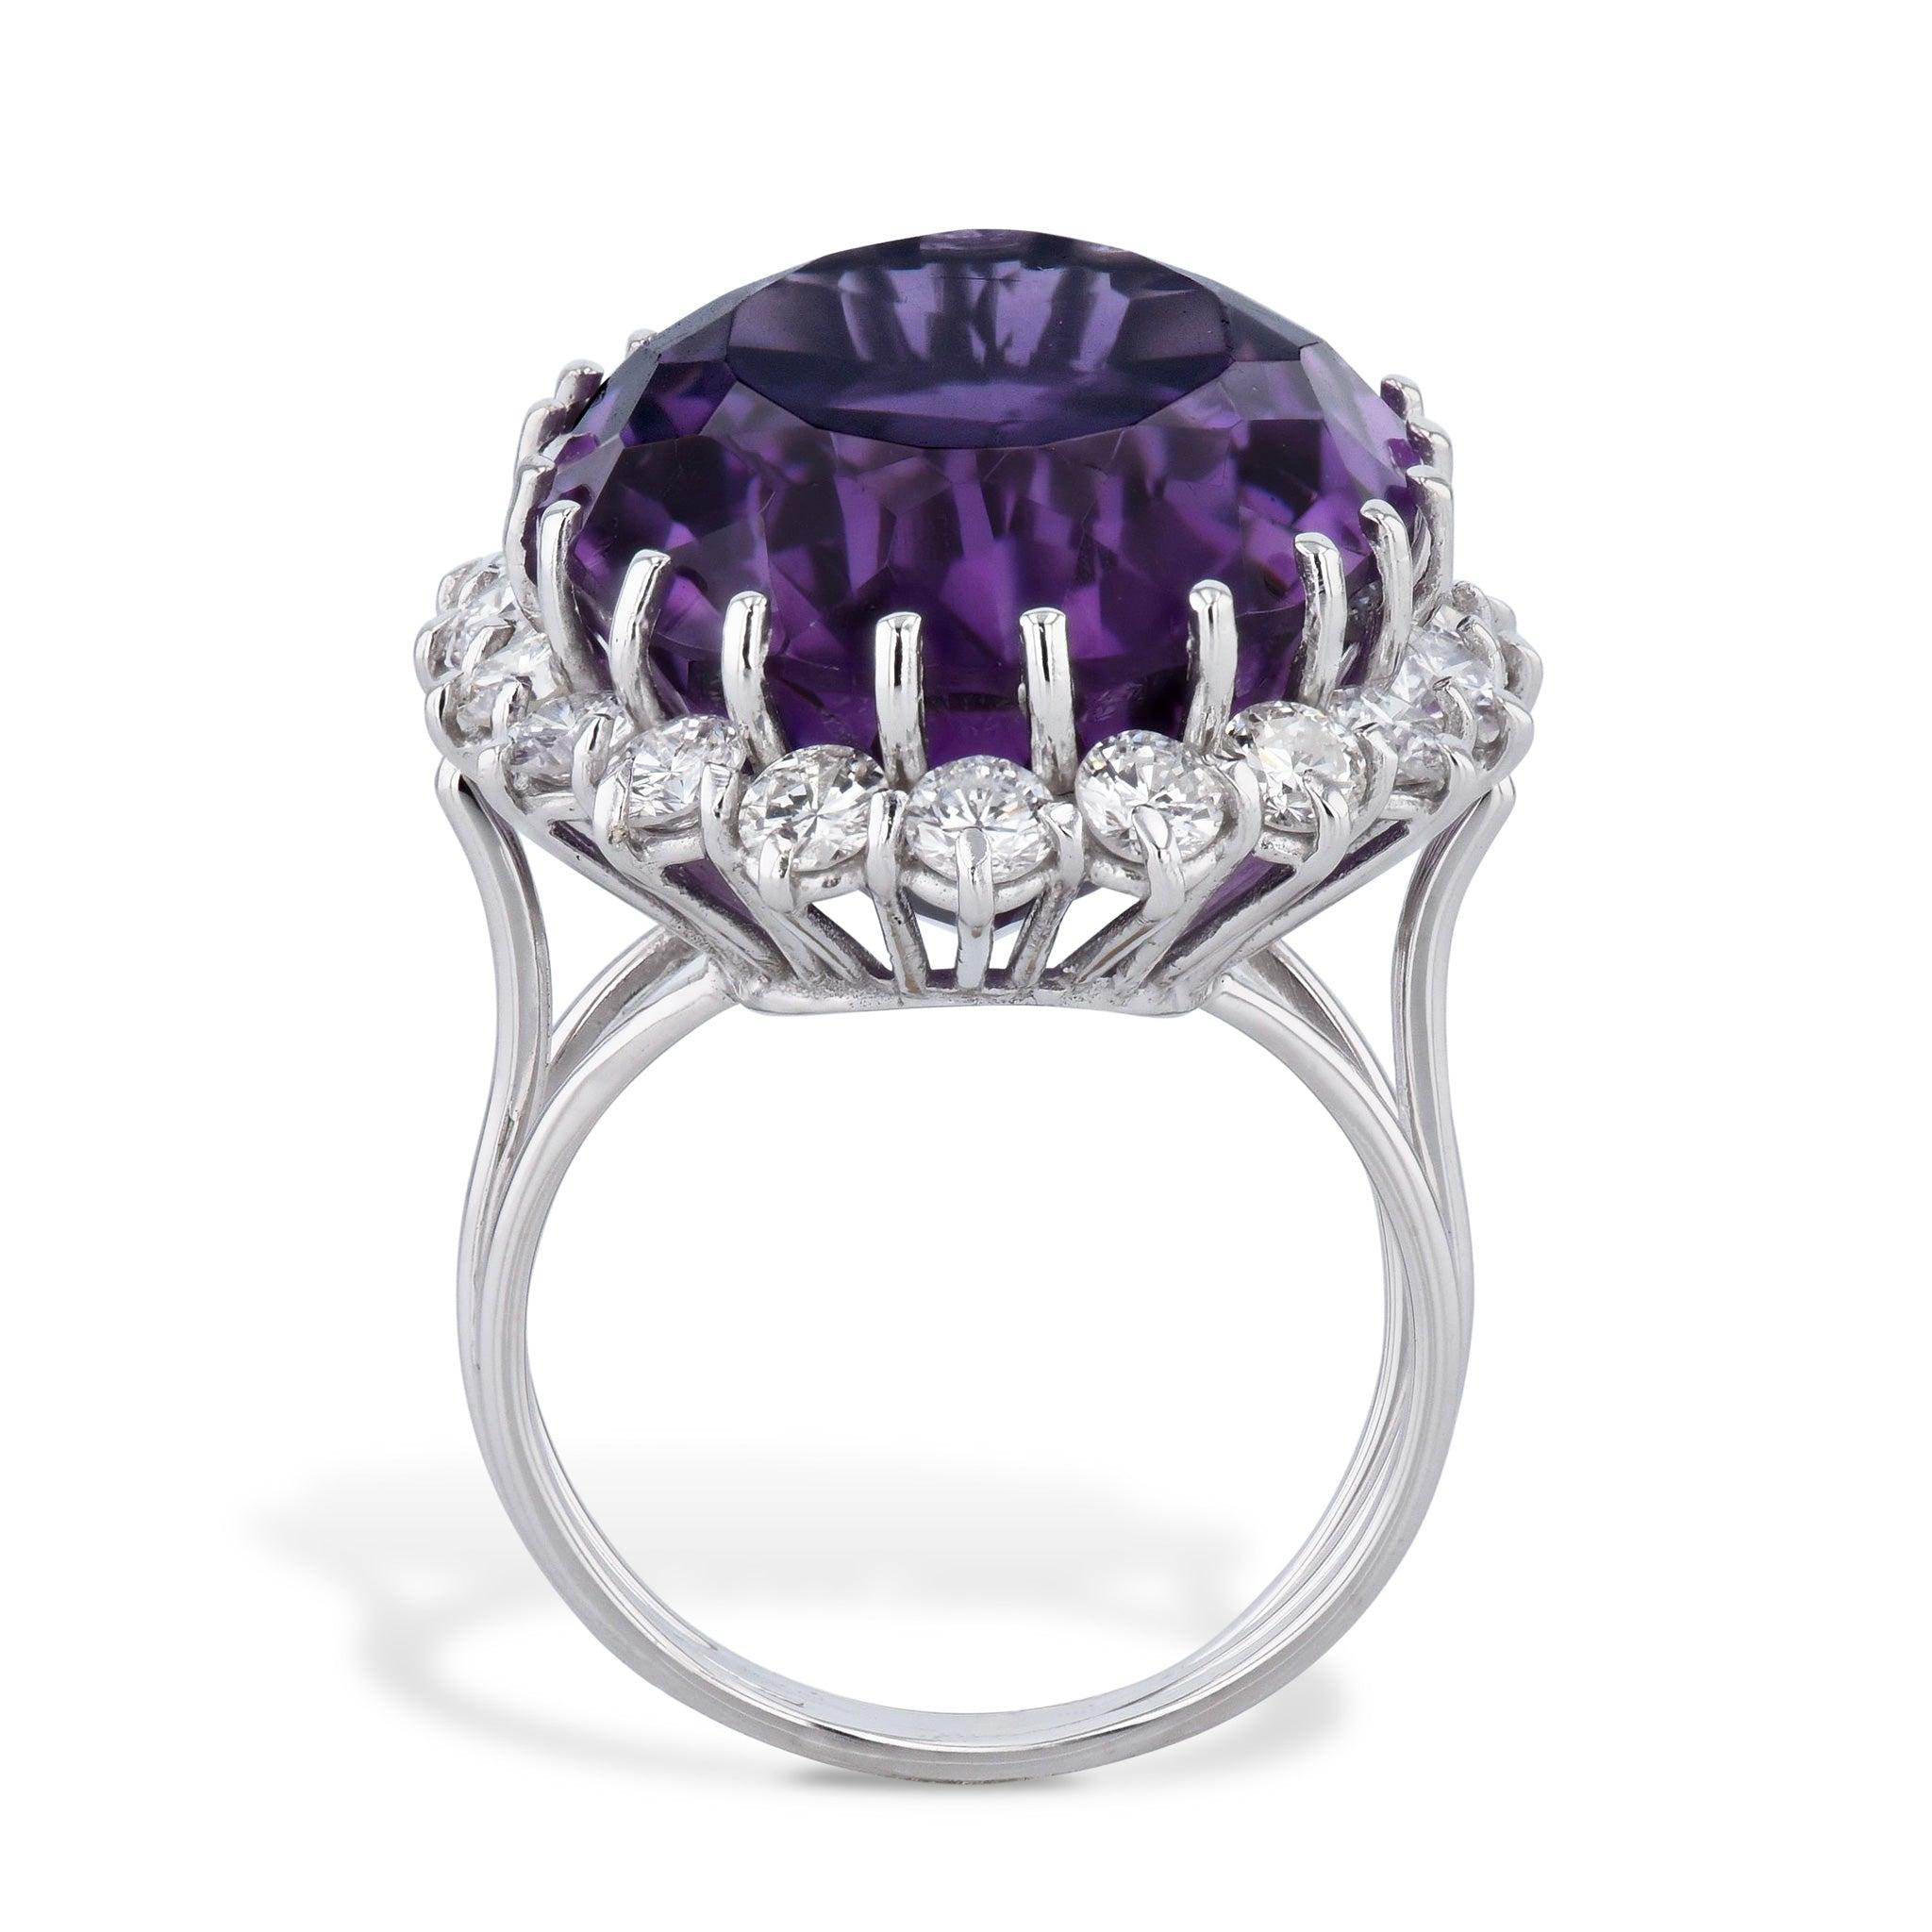 Gorgeous 14kt White Gold Oval Amethyst and Diamond Estate Ring from the H&H Estate Collection! Oval Amethyst measures 21.55mm x 16.35mm x 11.06mm and is set with 20 glimmering diamonds. An elegant size 5.5 ring befitting of any special